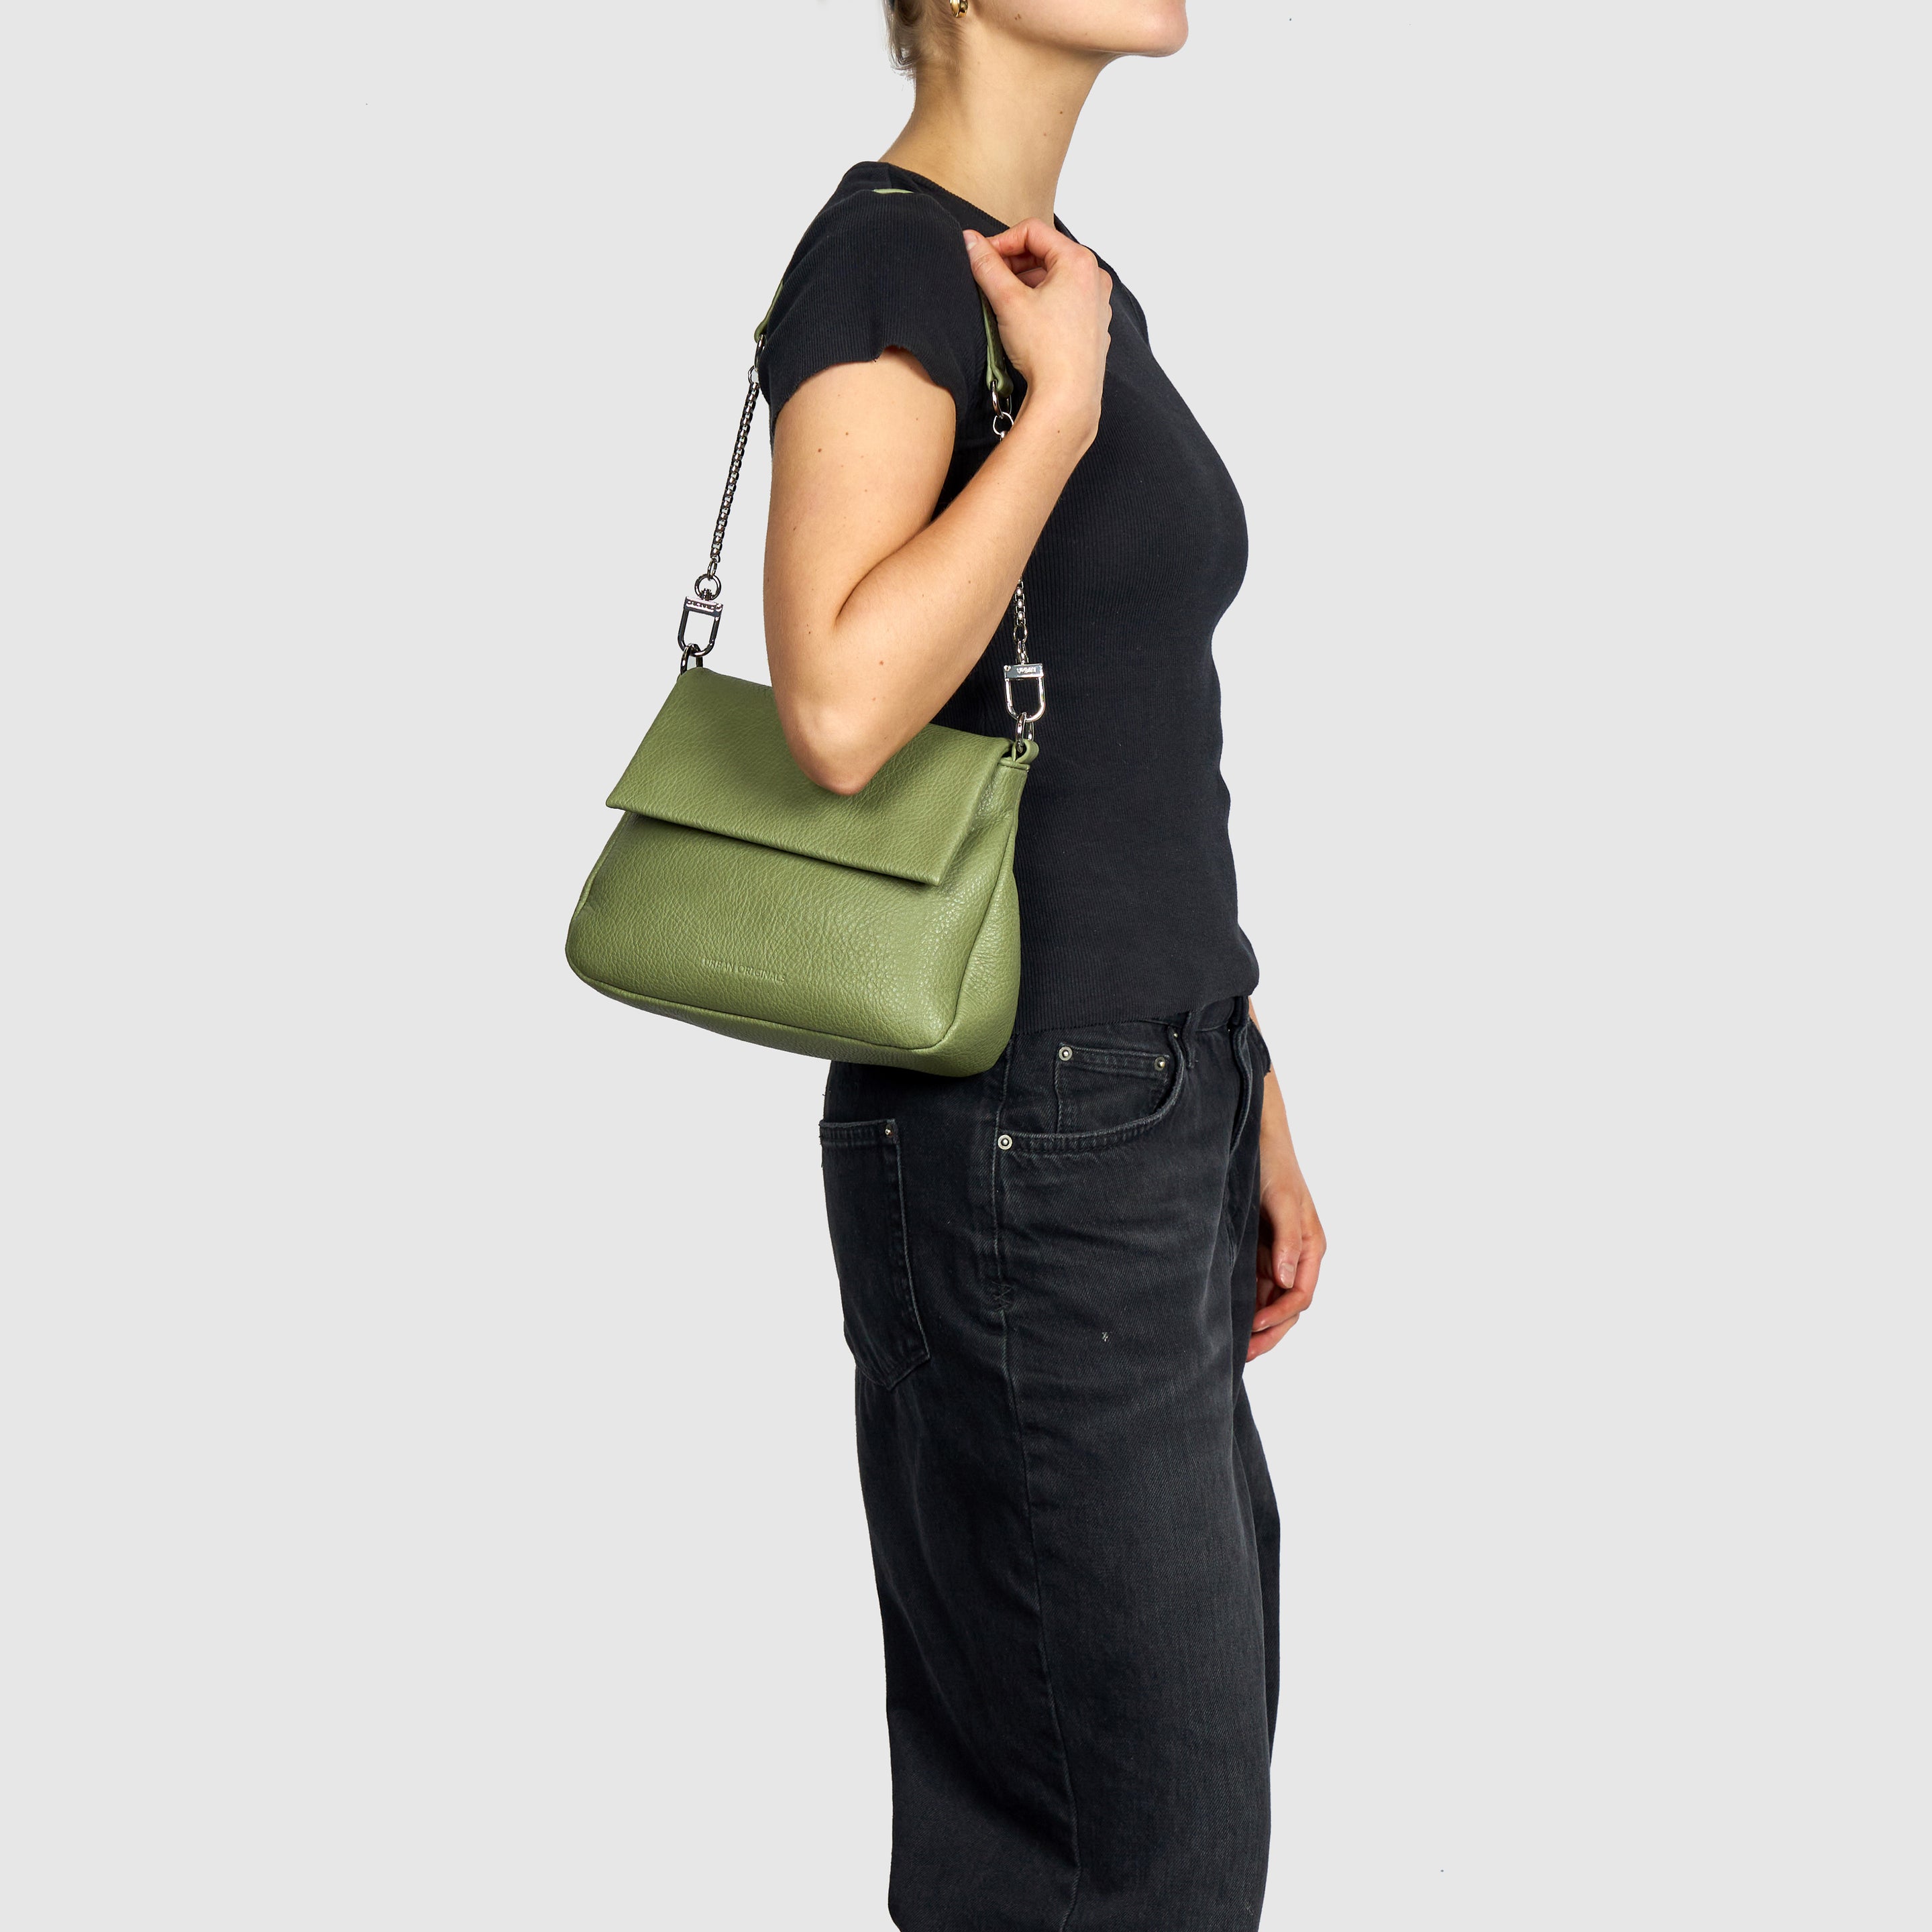 Load image into Gallery viewer, Wish List Crossbody - Green
